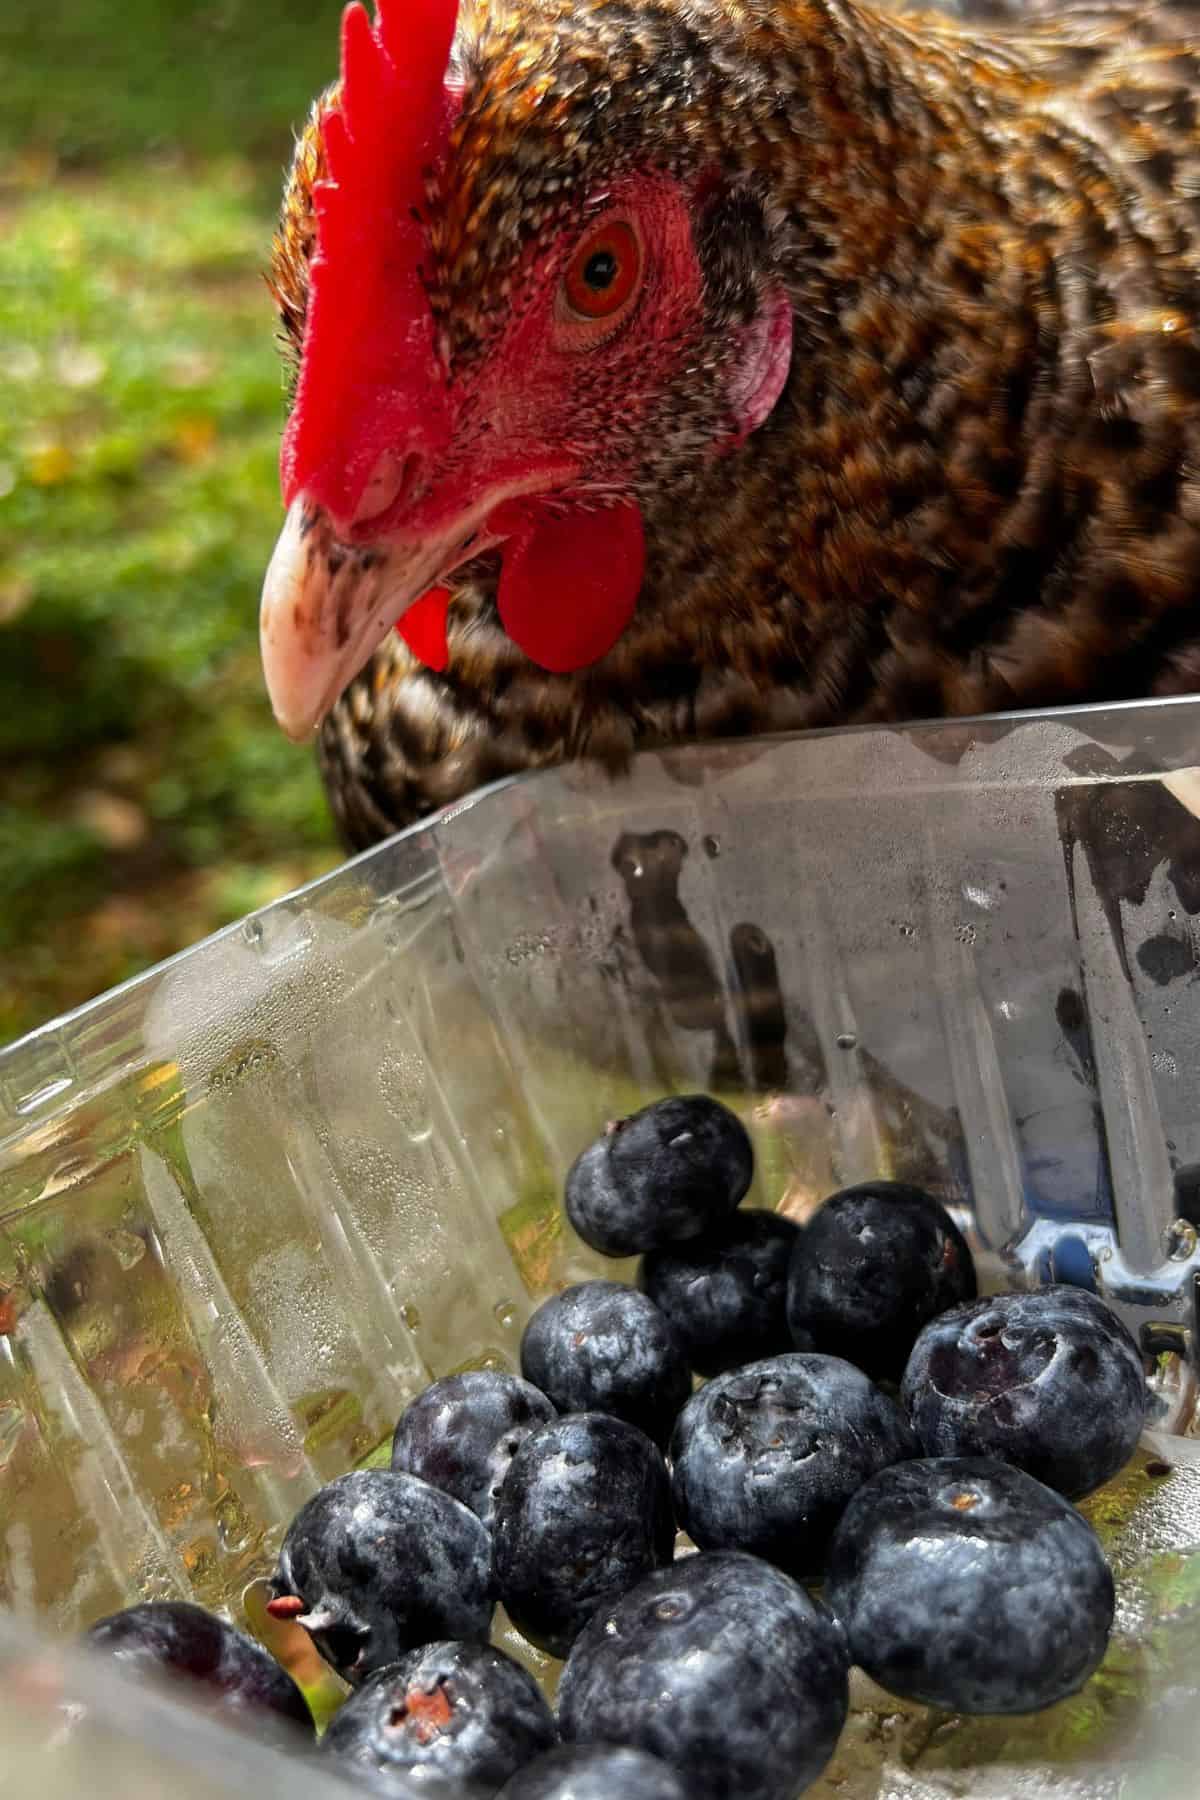 Chicken being held next to container of blueberries.